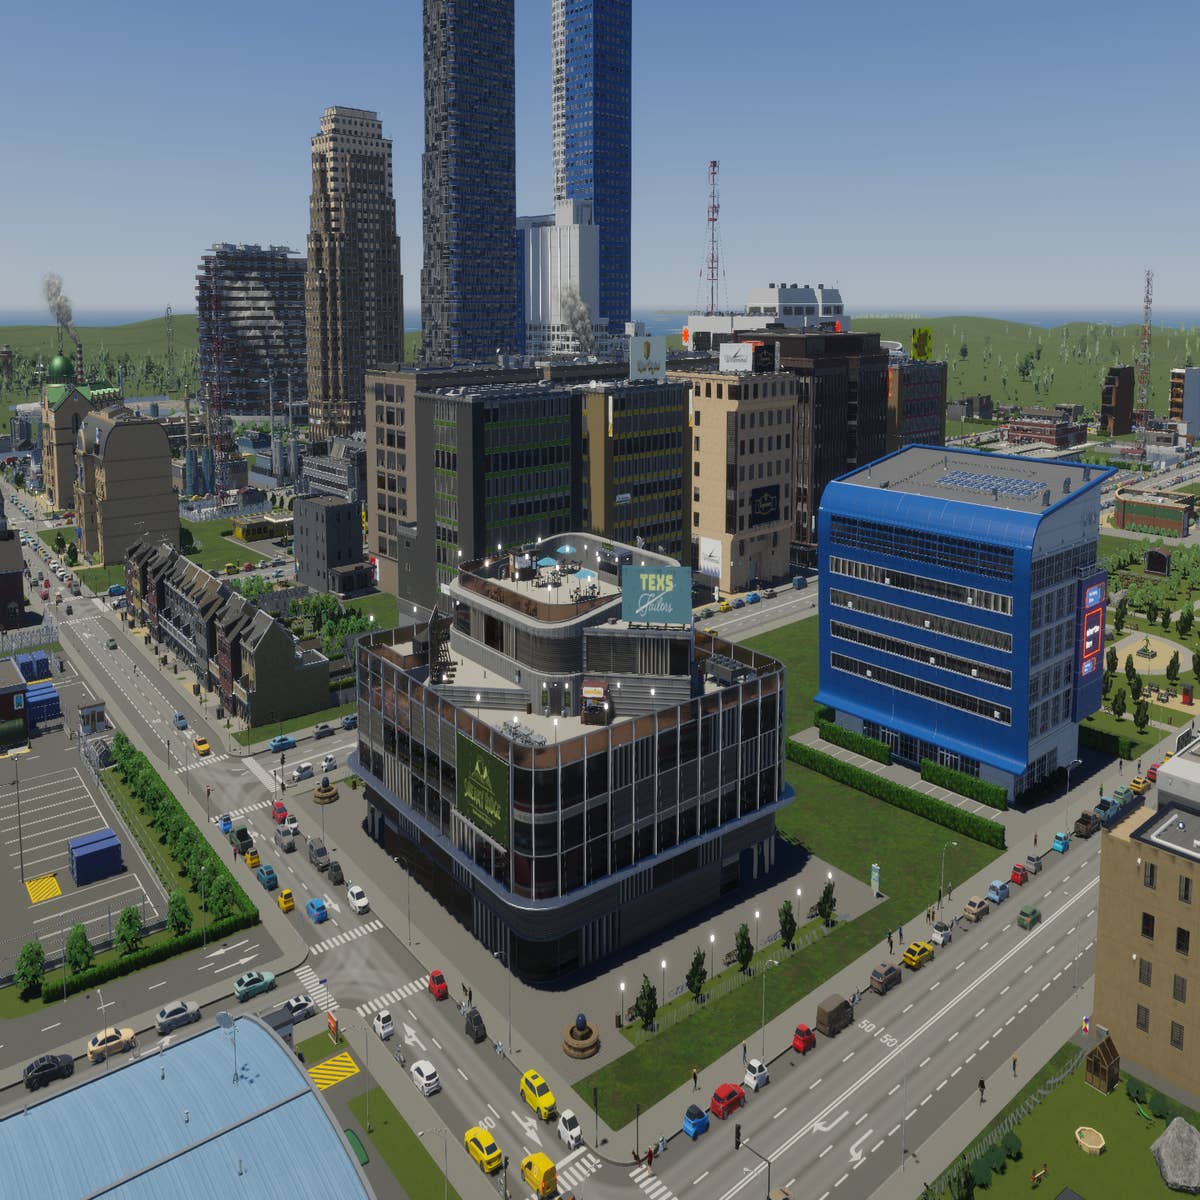 Cities: Skylines 2's editor tools are still a couple of months